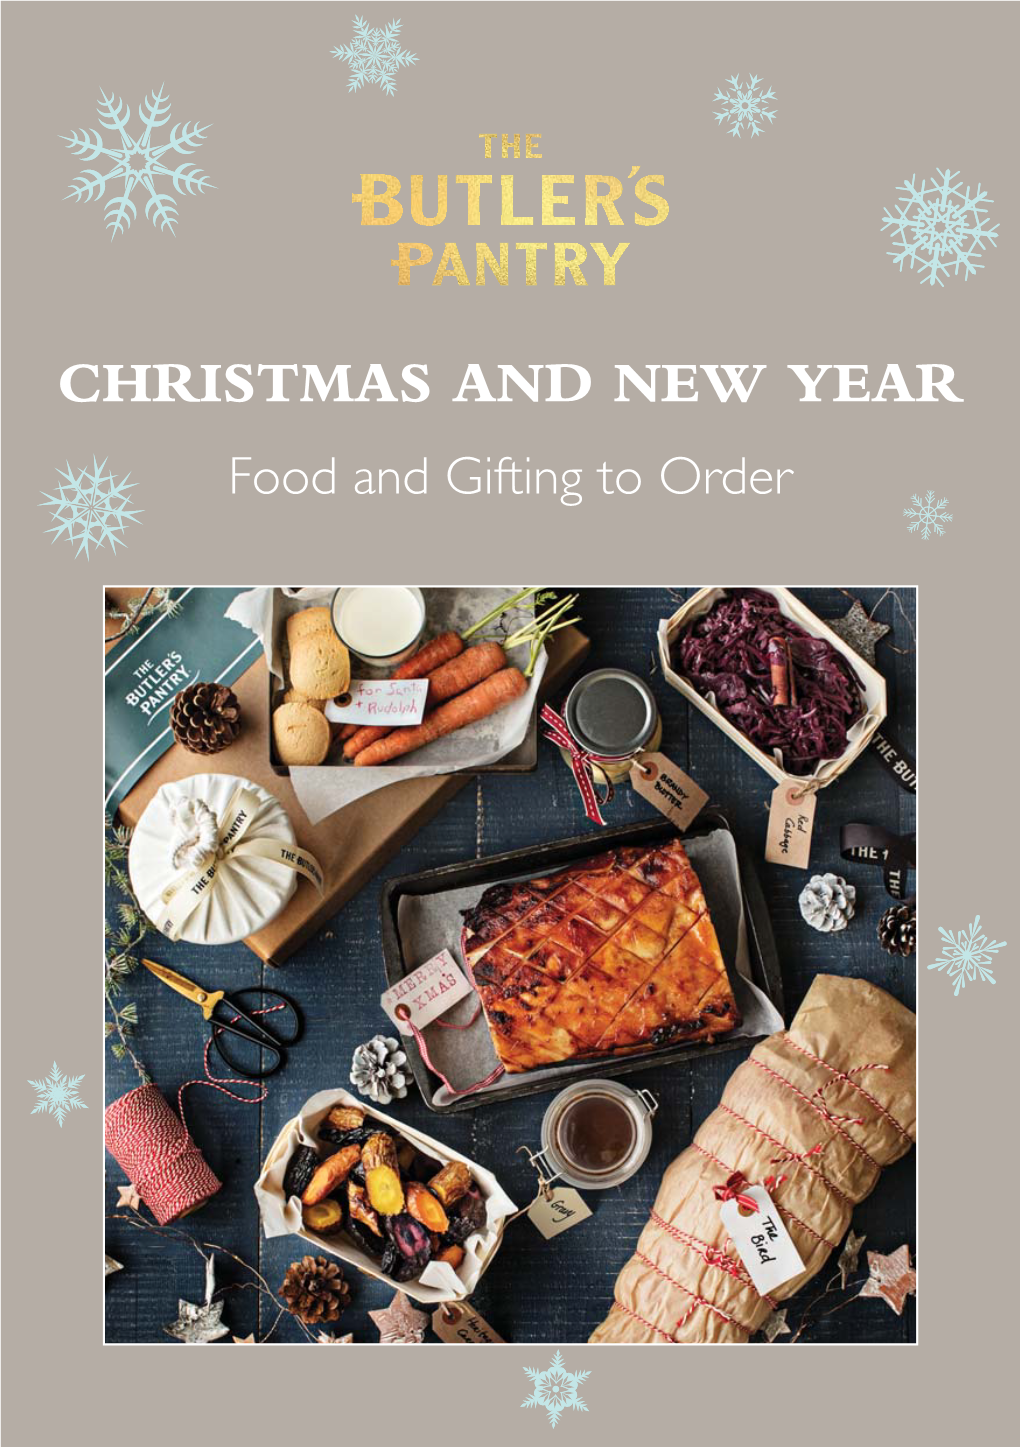 CHRISTMAS and NEW YEAR Food and Gifting to Order